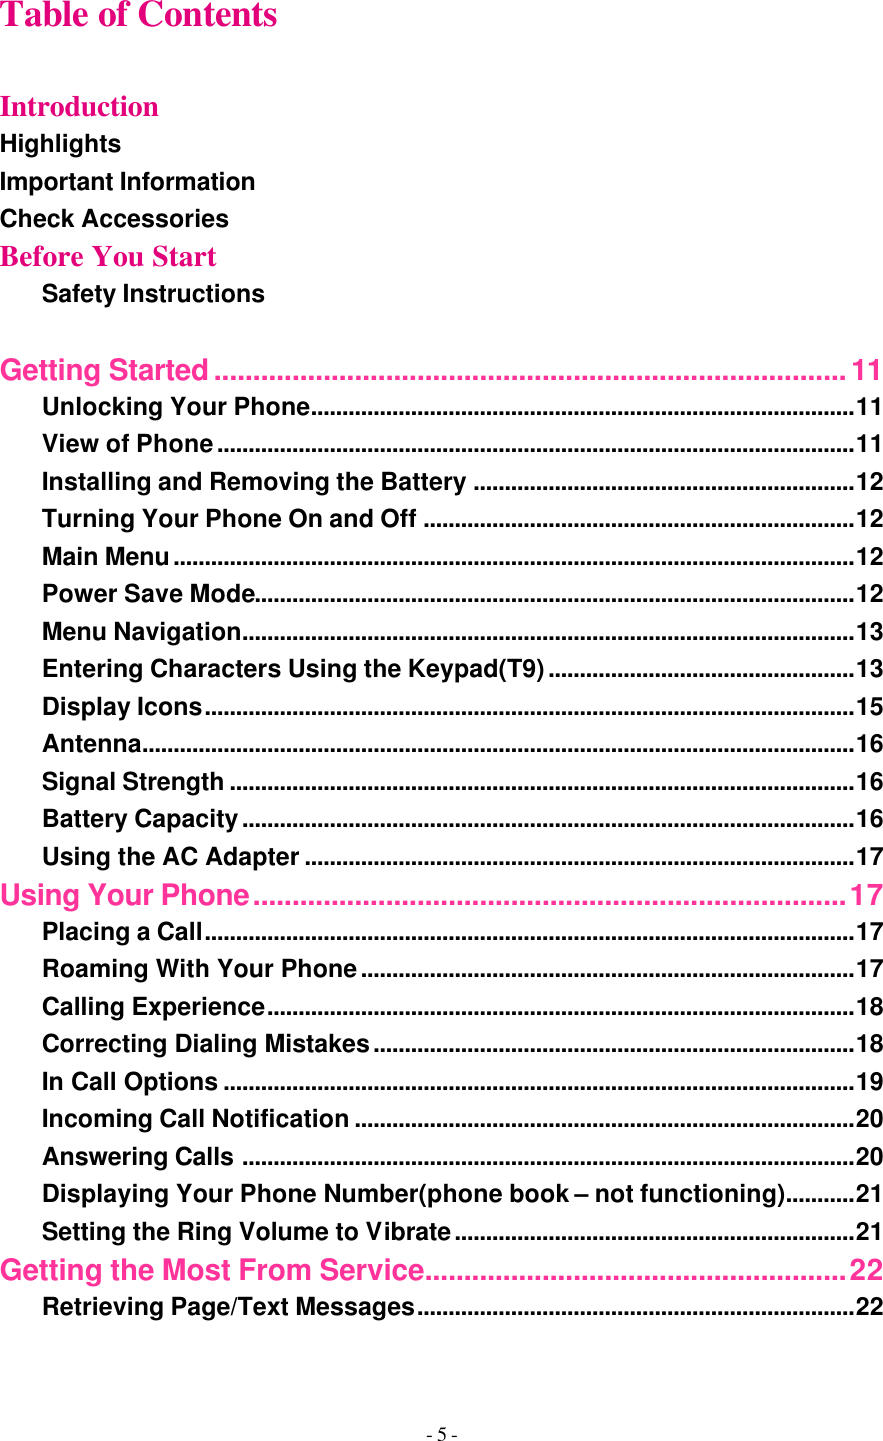 - 5 - Table of Contents  Introduction Highlights Important Information Check Accessories Before You Start Safety Instructions  Getting Started.................................................................................11 Unlocking Your Phone.......................................................................................11 View of Phone......................................................................................................11 Installing and Removing the Battery .............................................................12 Turning Your Phone On and Off .....................................................................12 Main Menu.............................................................................................................12 Power Save Mode................................................................................................12 Menu Navigation..................................................................................................13 Entering Characters Using the Keypad(T9).................................................13 Display Icons........................................................................................................15 Antenna..................................................................................................................16 Signal Strength ....................................................................................................16 Battery Capacity..................................................................................................16 Using the AC Adapter ........................................................................................17 Using Your Phone............................................................................17 Placing a Call........................................................................................................17 Roaming With Your Phone...............................................................................17 Calling Experience..............................................................................................18 Correcting Dialing Mistakes.............................................................................18 In Call Options .....................................................................................................19 Incoming Call Notification ................................................................................20 Answering Calls ..................................................................................................20 Displaying Your Phone Number(phone book – not functioning)...........21 Setting the Ring Volume to Vibrate................................................................21 Getting the Most From Service......................................................22 Retrieving Page/Text Messages......................................................................22 